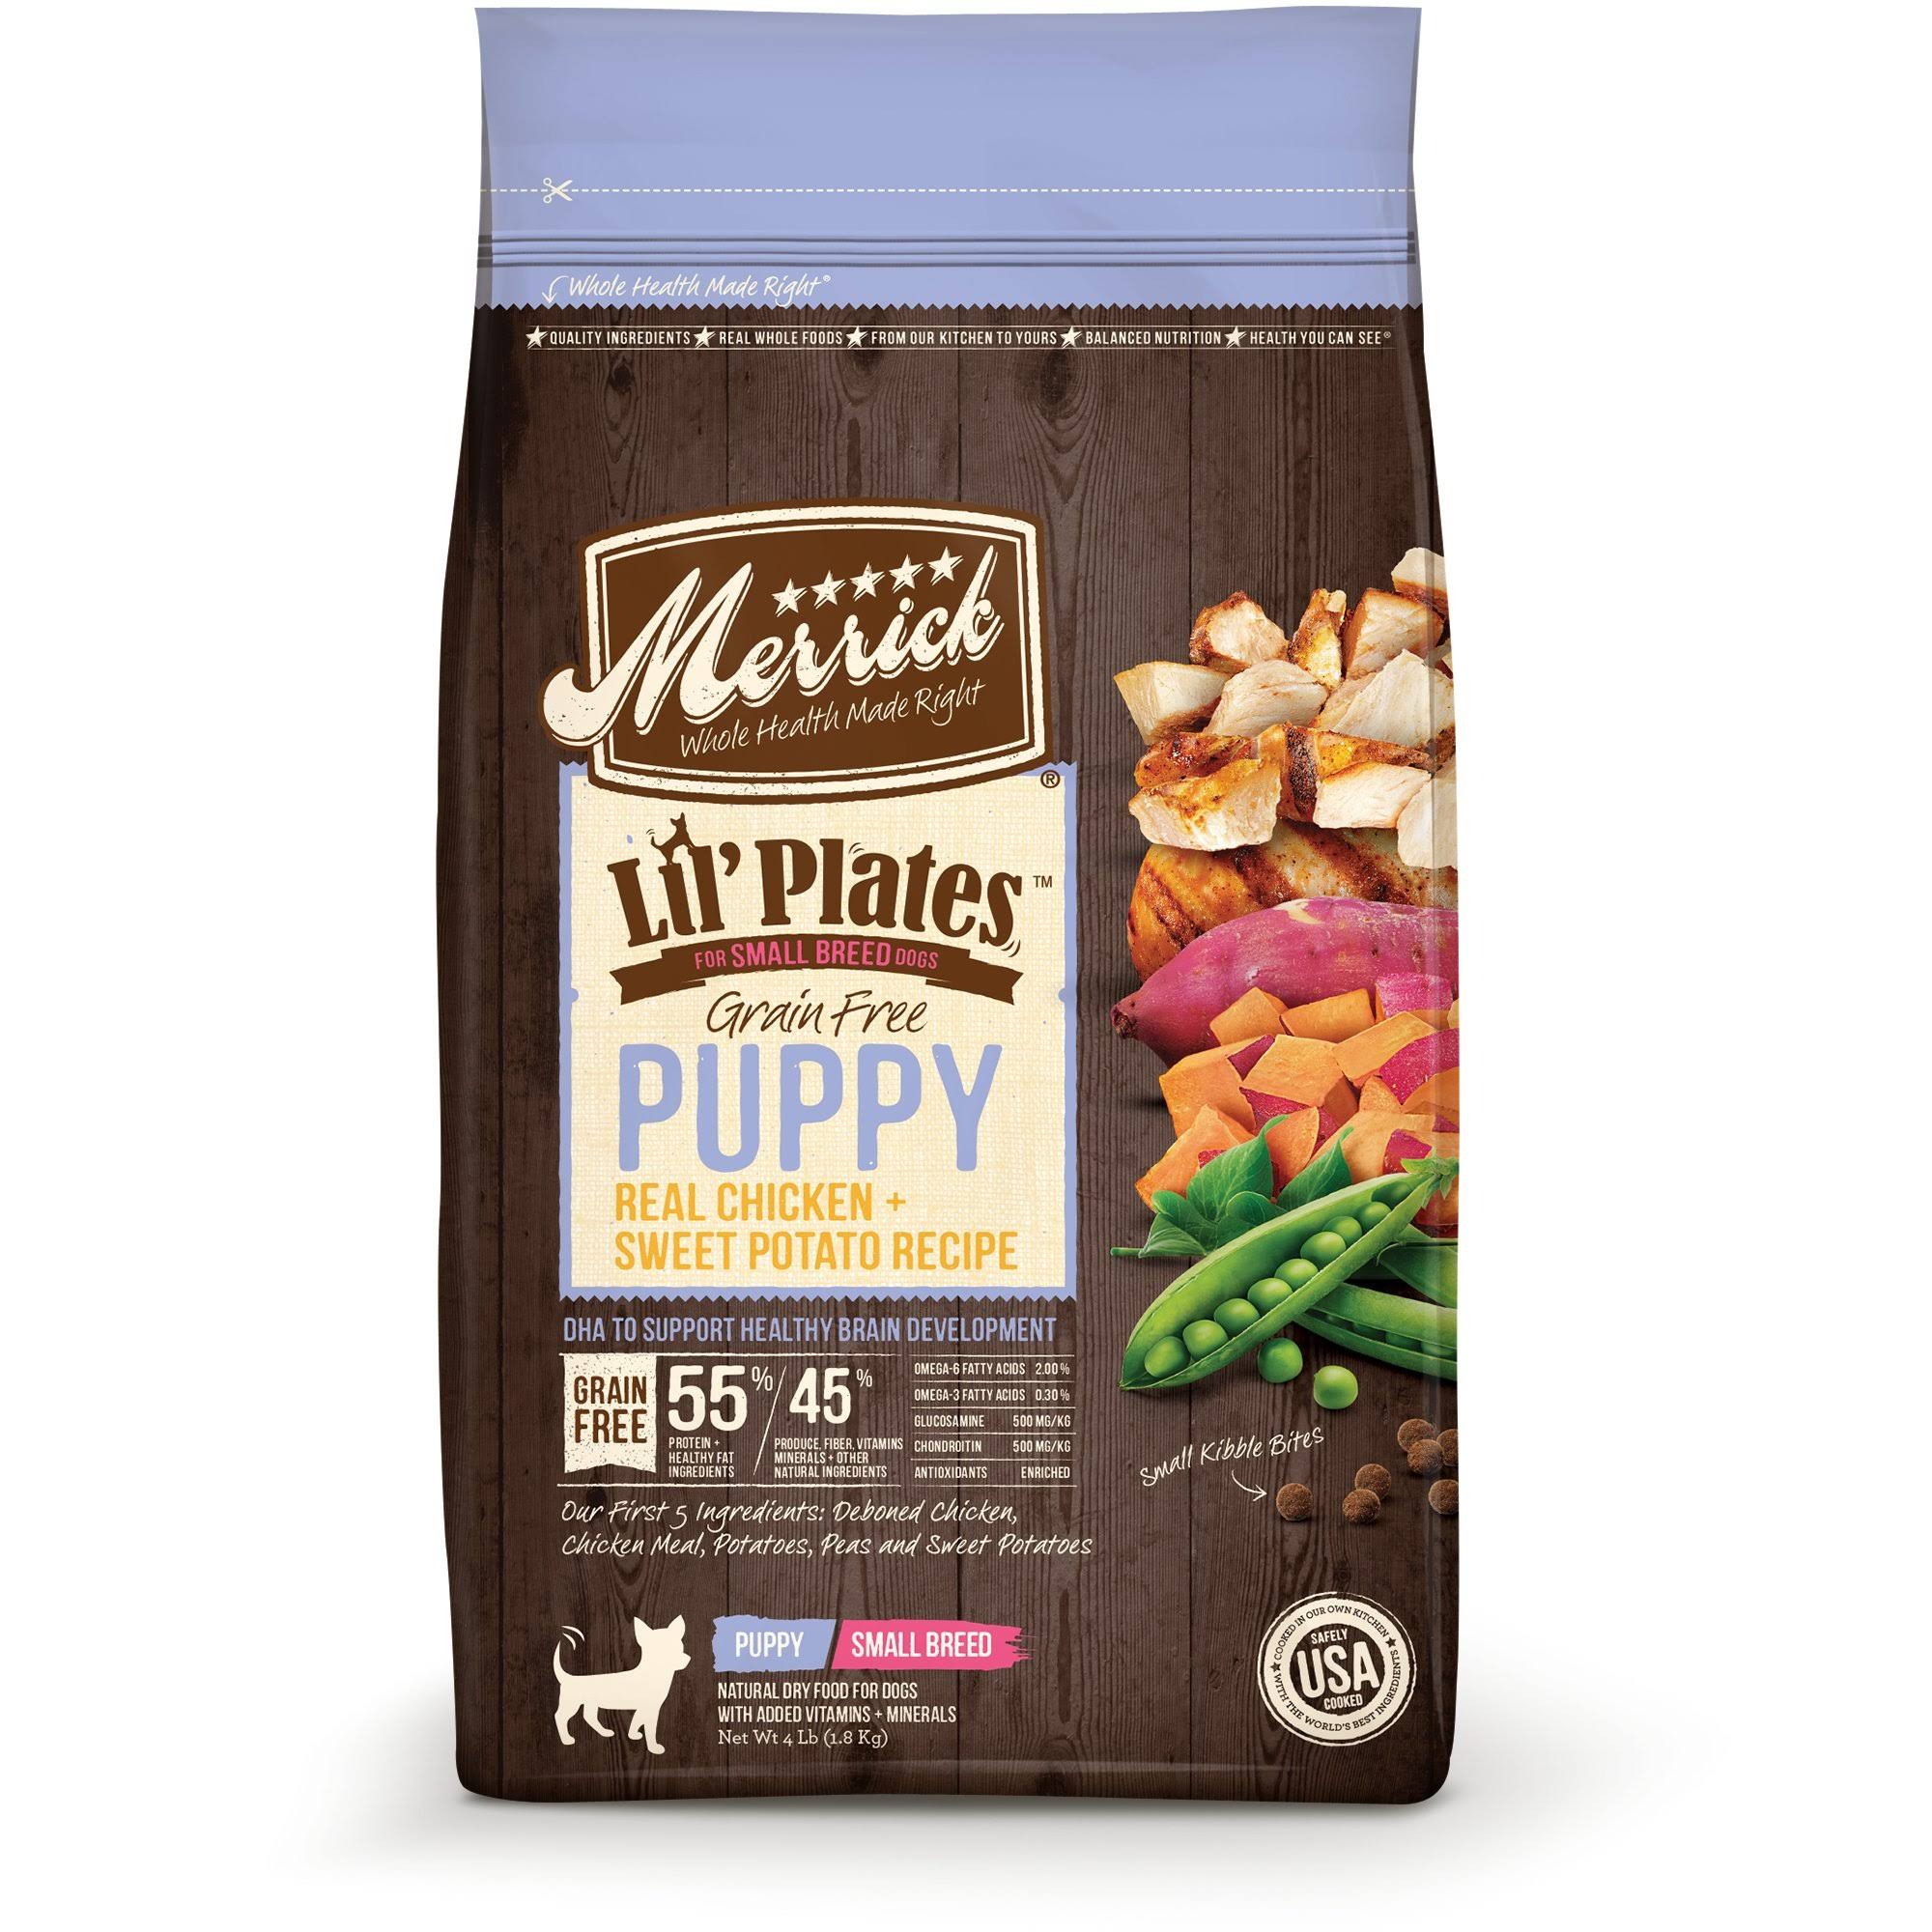 Merrick Grain Free Puppy Real Chicken + Sweet Potato Recipe Natural Dry Food For Dogs - 4 lbs